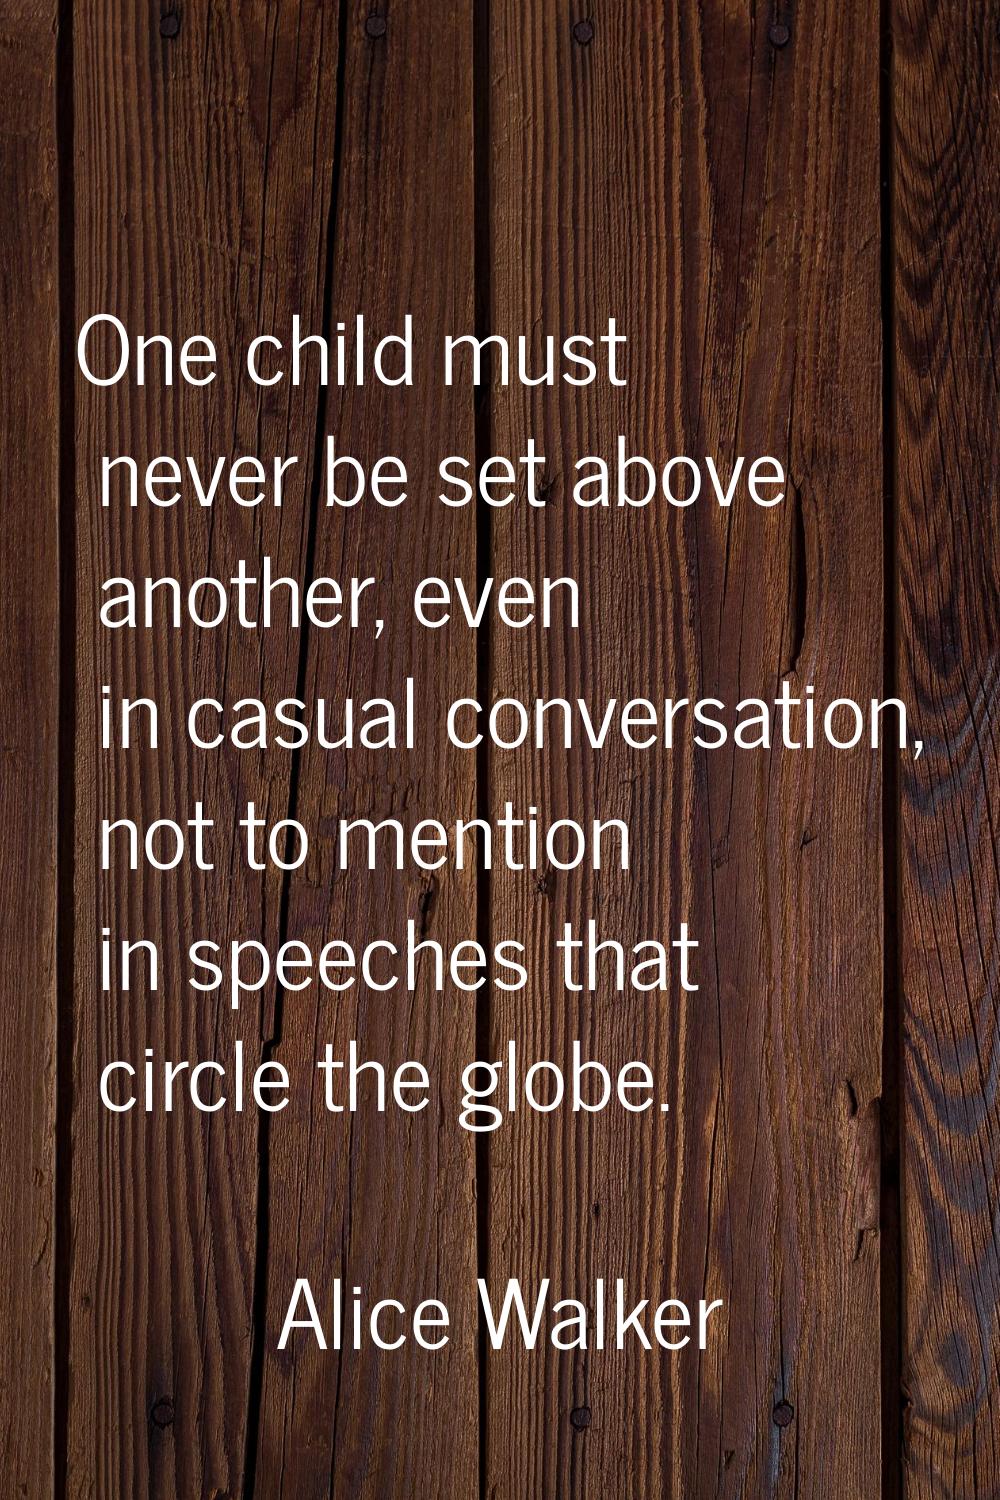 One child must never be set above another, even in casual conversation, not to mention in speeches 